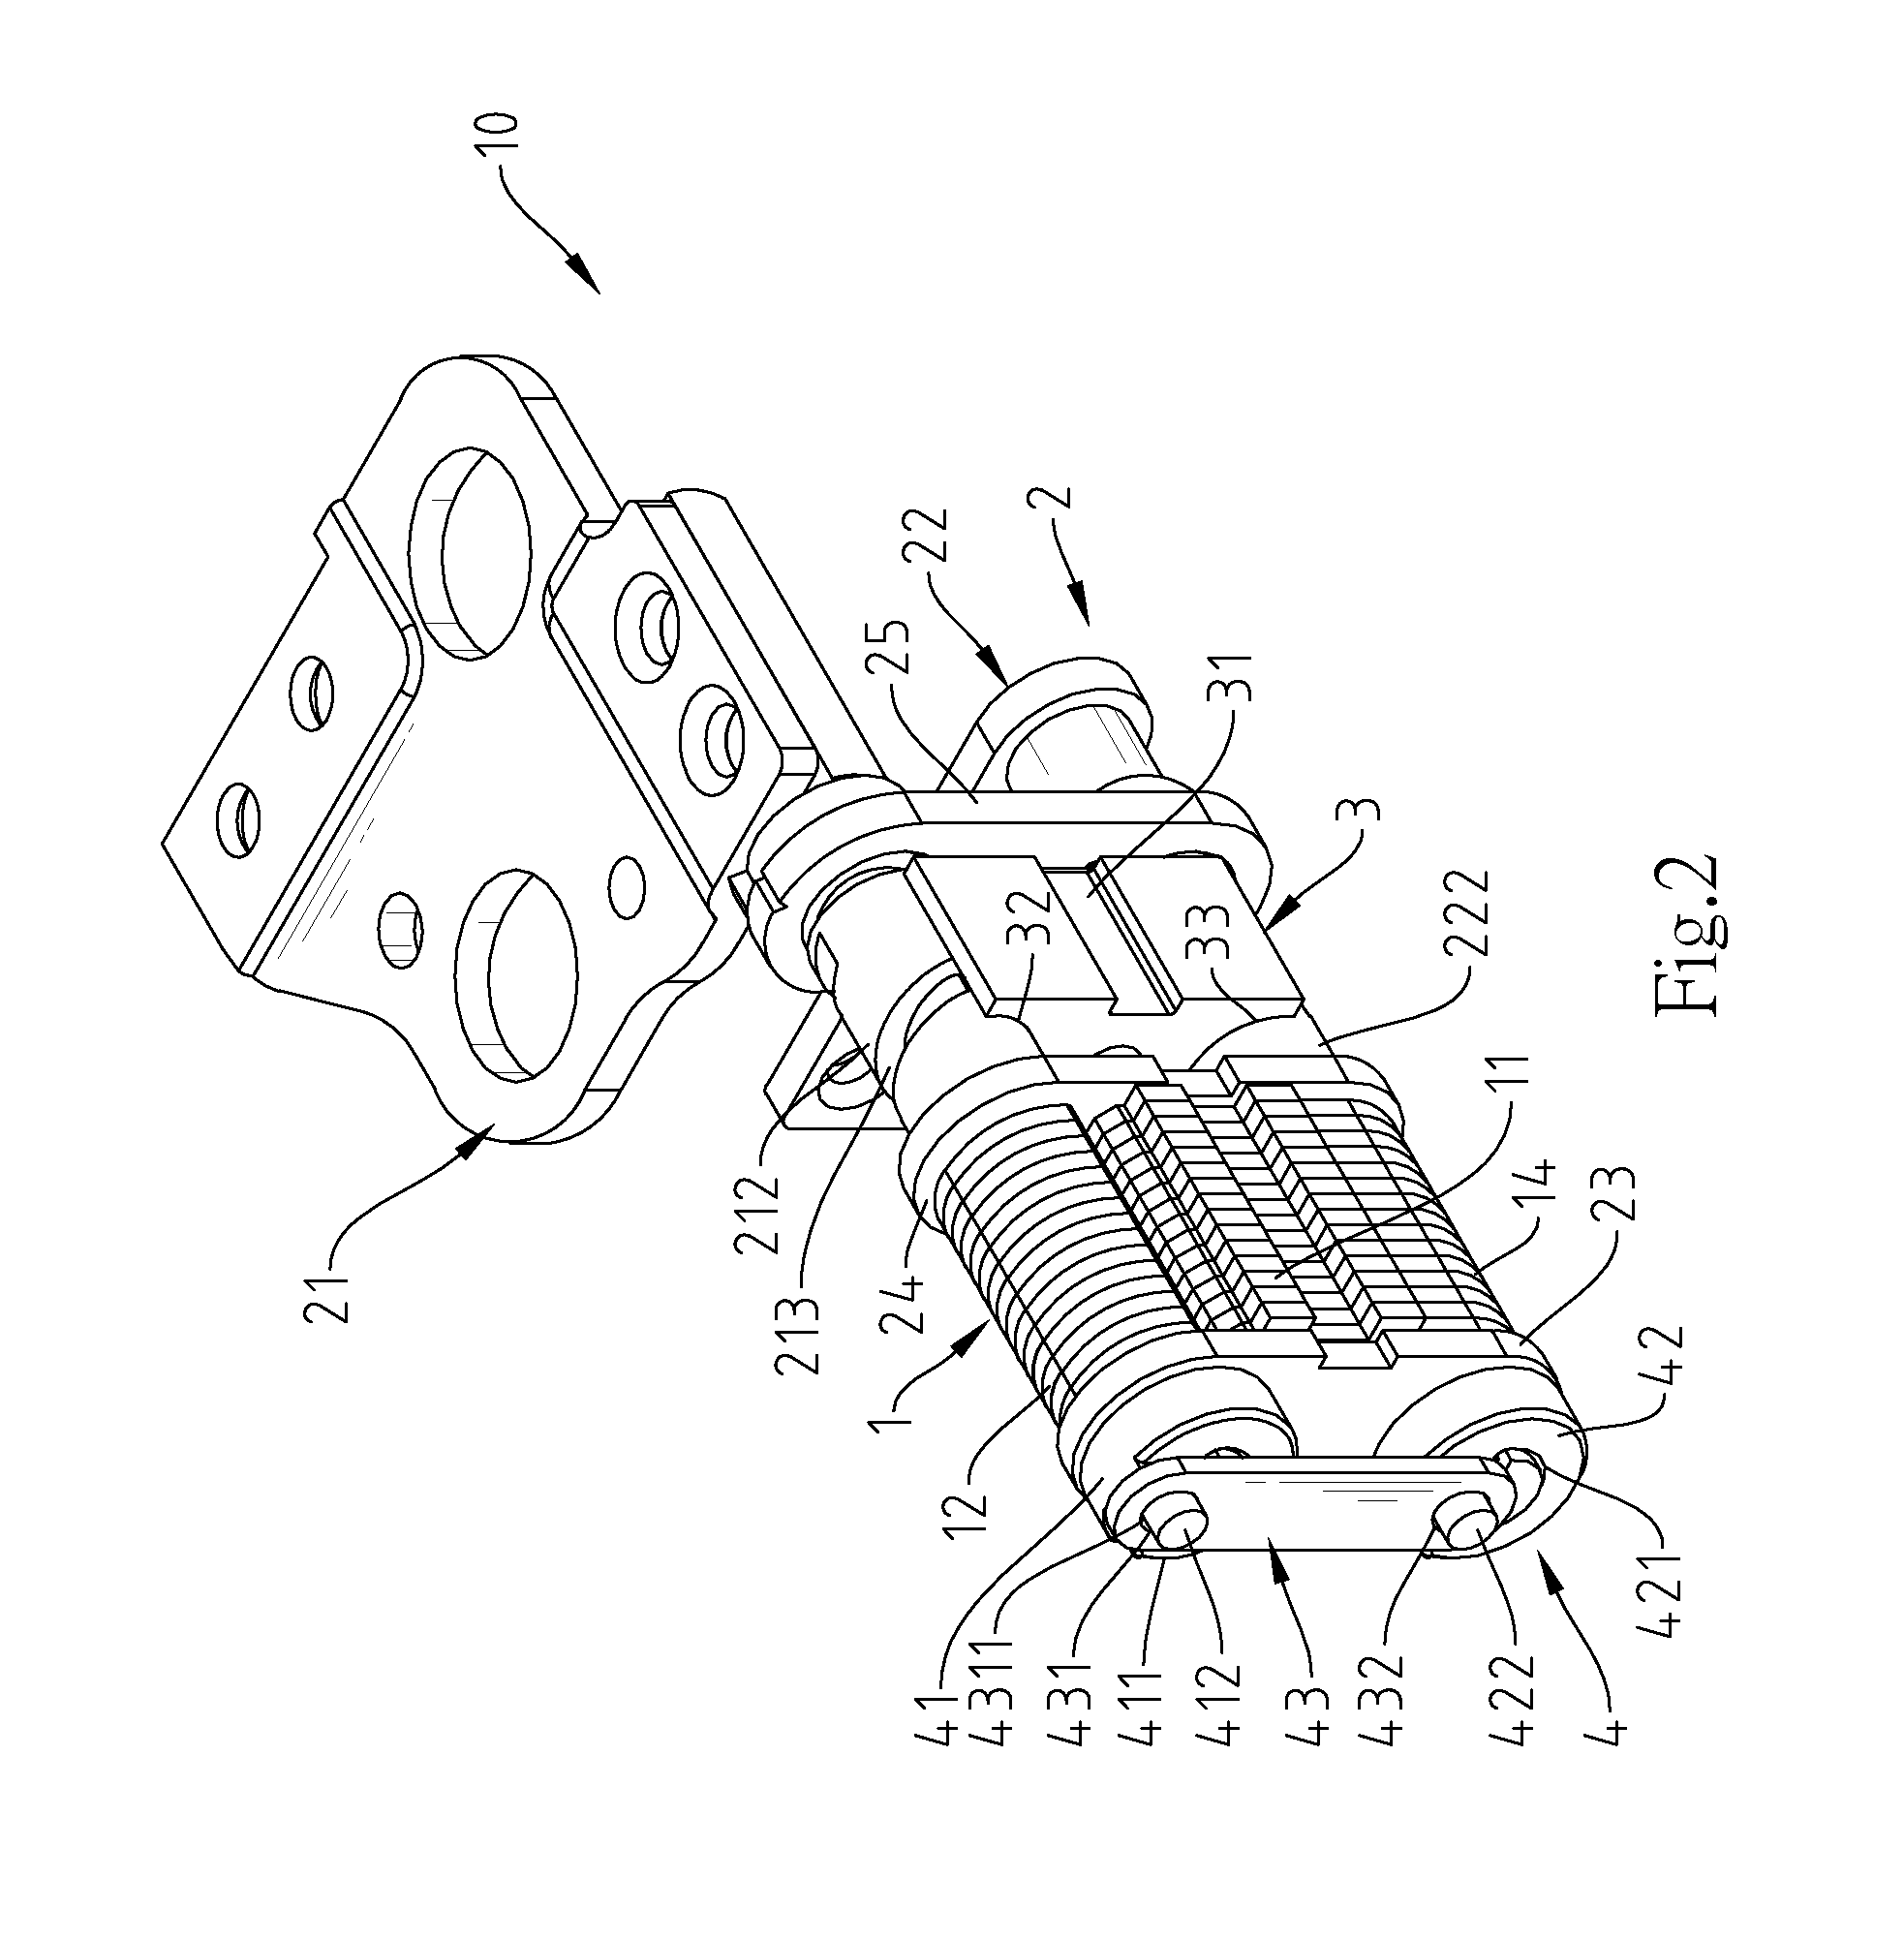 Dual-shaft hinge for flip-up electronic product